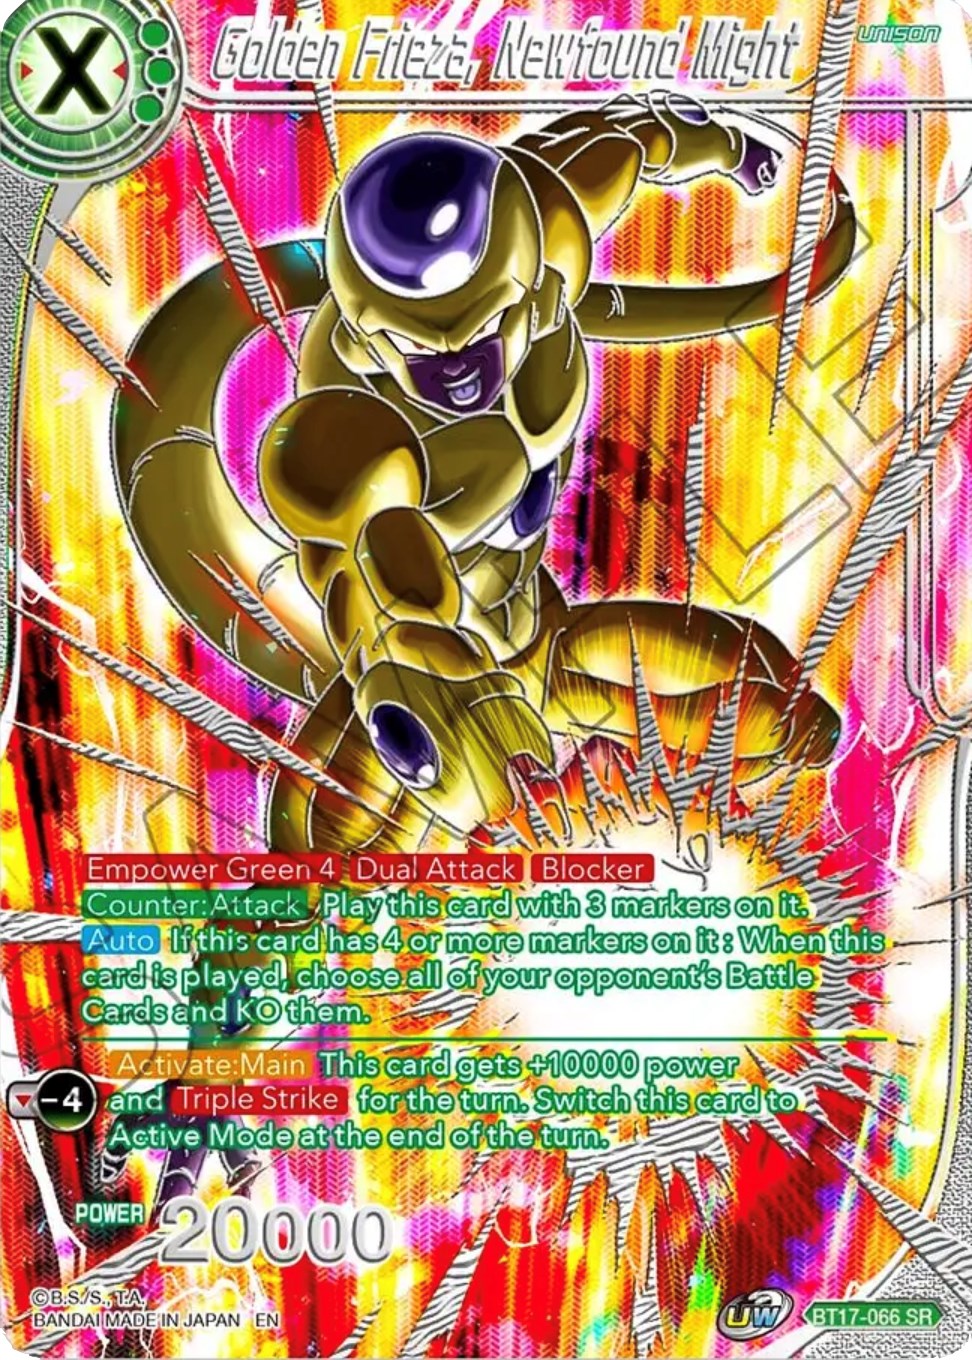 Golden Frieza, Newfound Might (BT17-066) [Collector's Selection Vol. 3] | North Valley Games